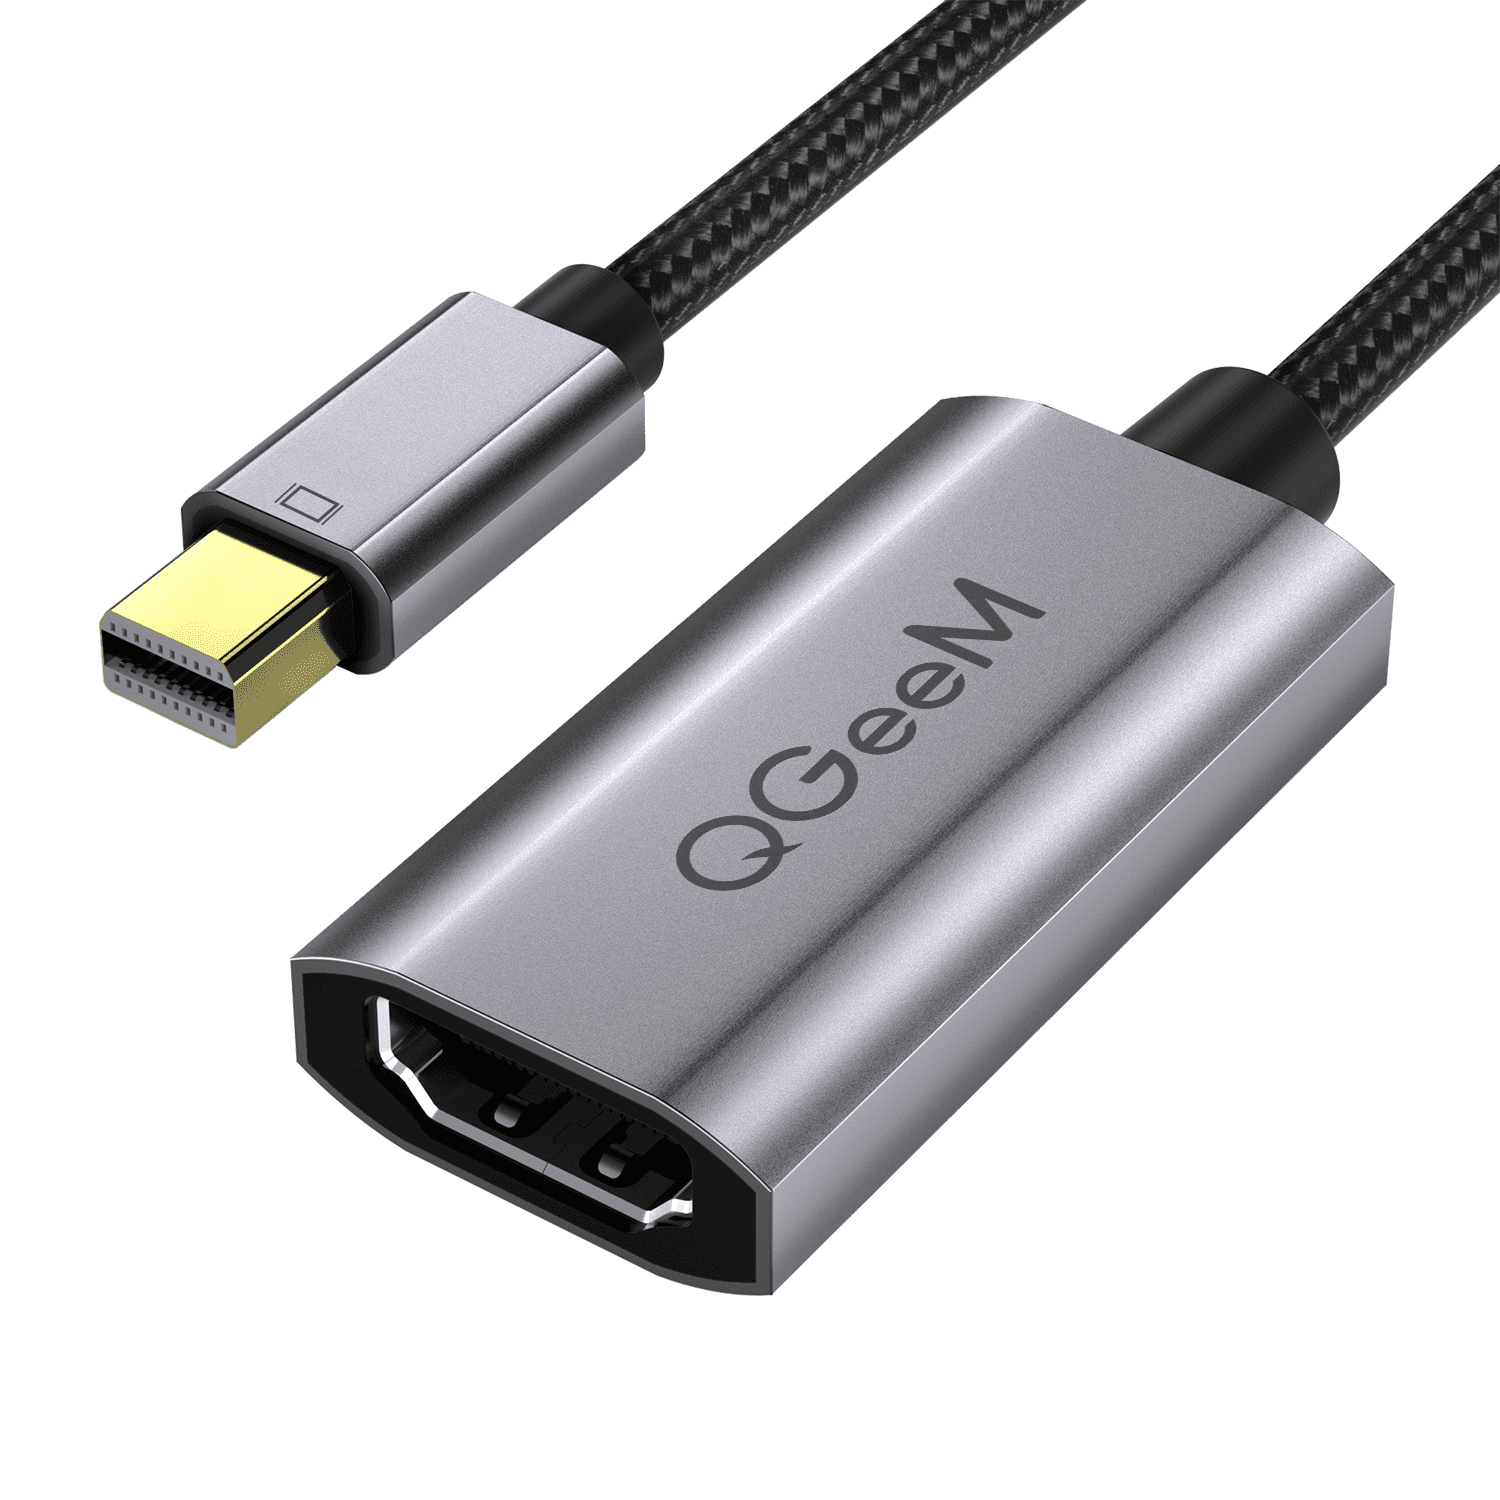  Master Cables Thunderbolt Mini DisplayPort DP to HDMI Adapter  Audio Video HDTV Cable Converter for Apple MacBook Pro, MacBook Air, iMac,  Mac Mini, Microsoft Surface Pro etc Branded : Electronics